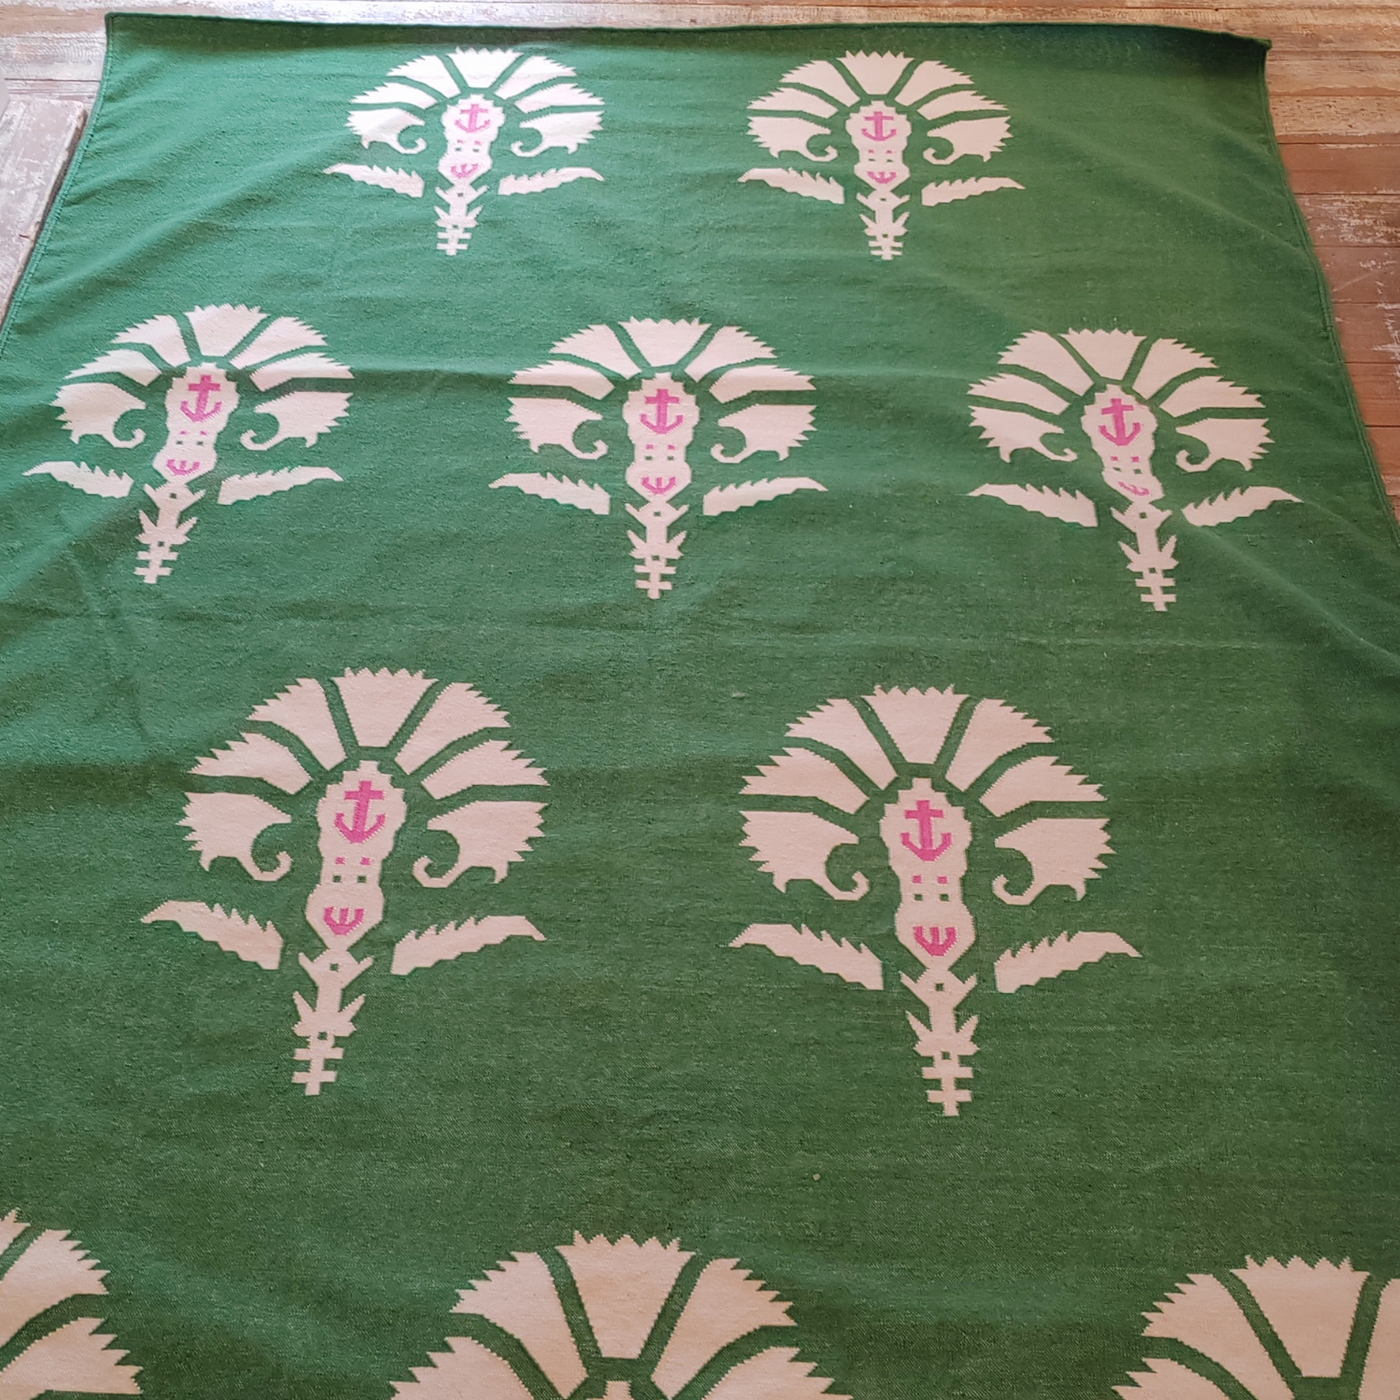 Floral Ottoman Flatweave Rug - Green, Pink & Off-White - 1.8 x 2.75m